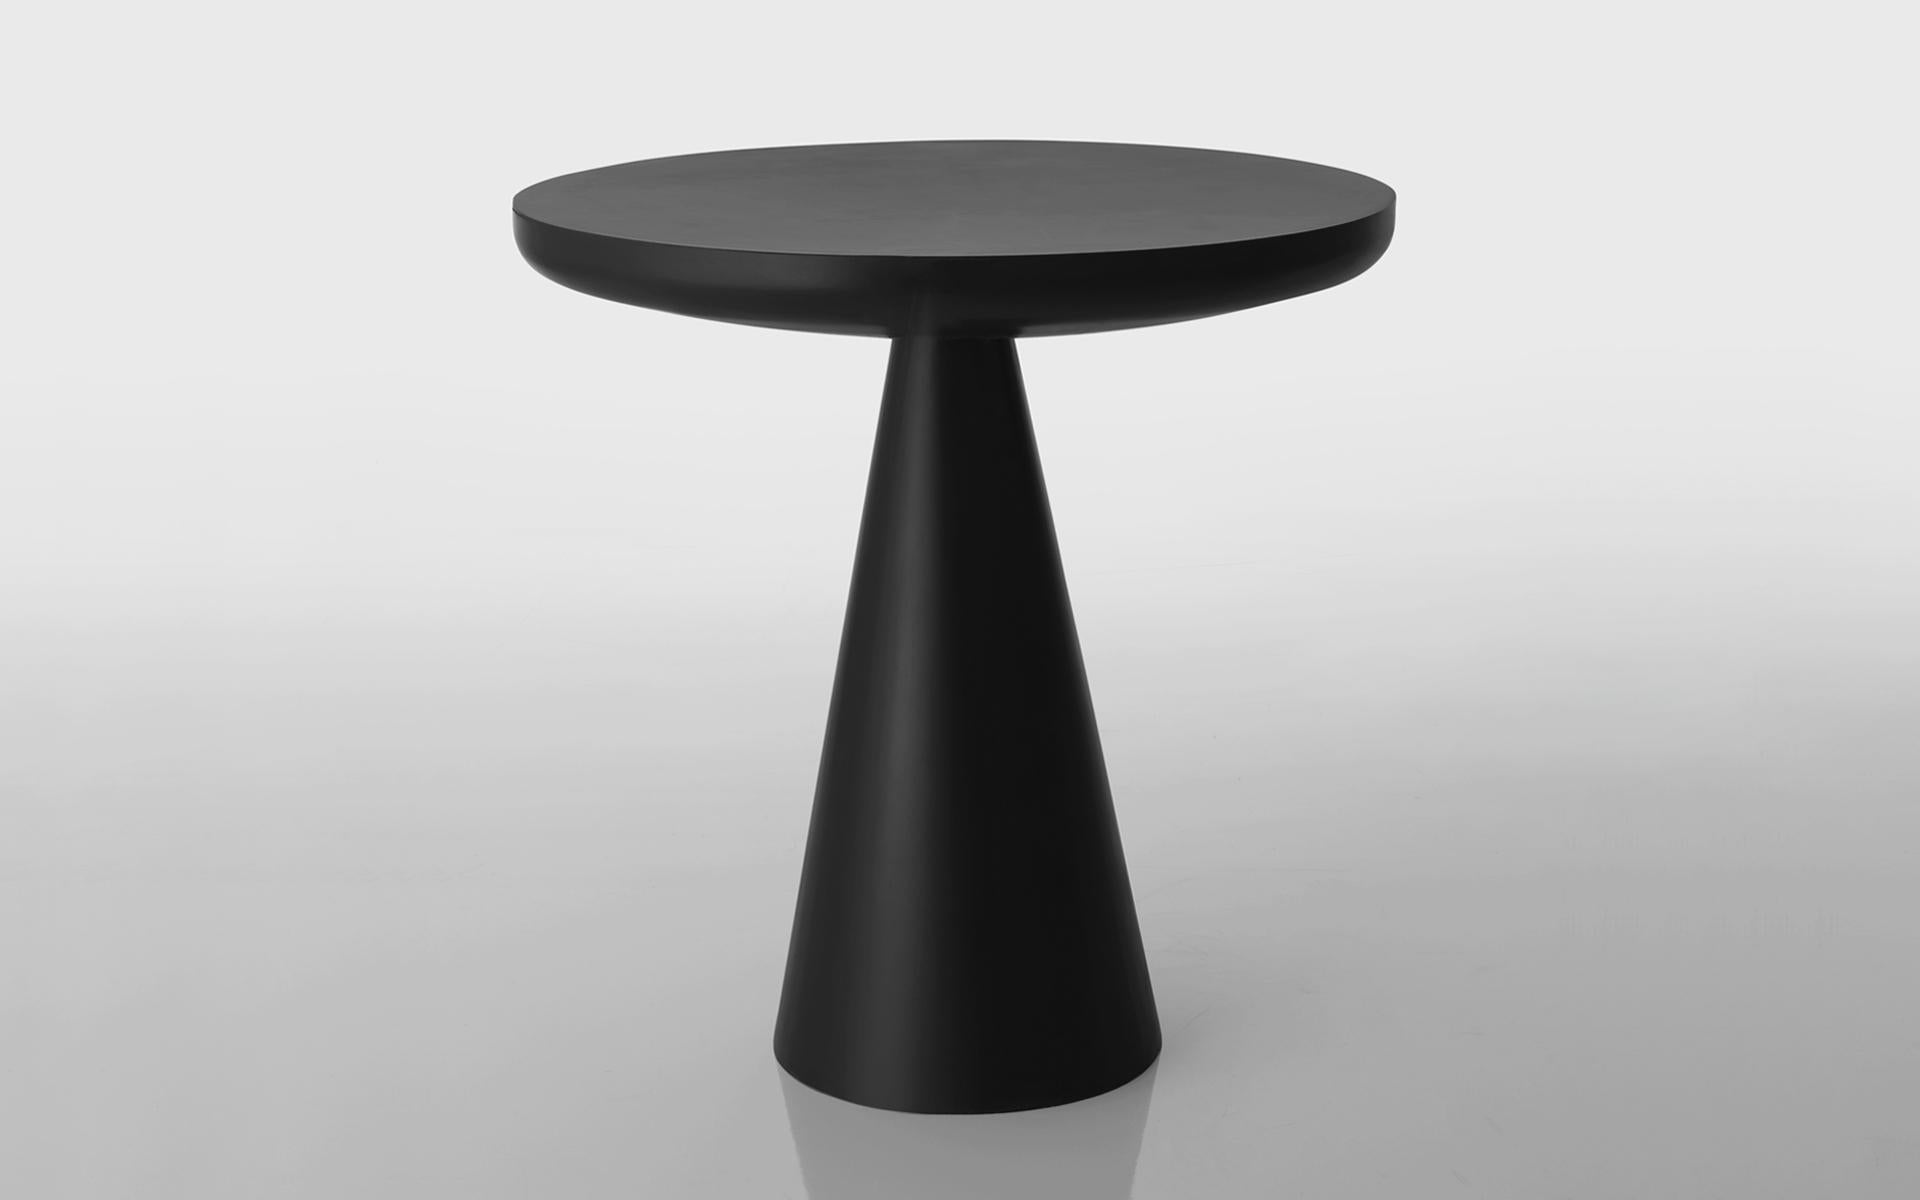 Miss table by Imperfettolab
Dimensions: Ø 84 x H 85 cm
Materials: Fiberglass

Imperfetto Lab
Who we are ? We are a family.
Verter Turroni, Emanuela Ravelli and our children Elia, Margherita and Eusebio.
All together, we are separate parts and